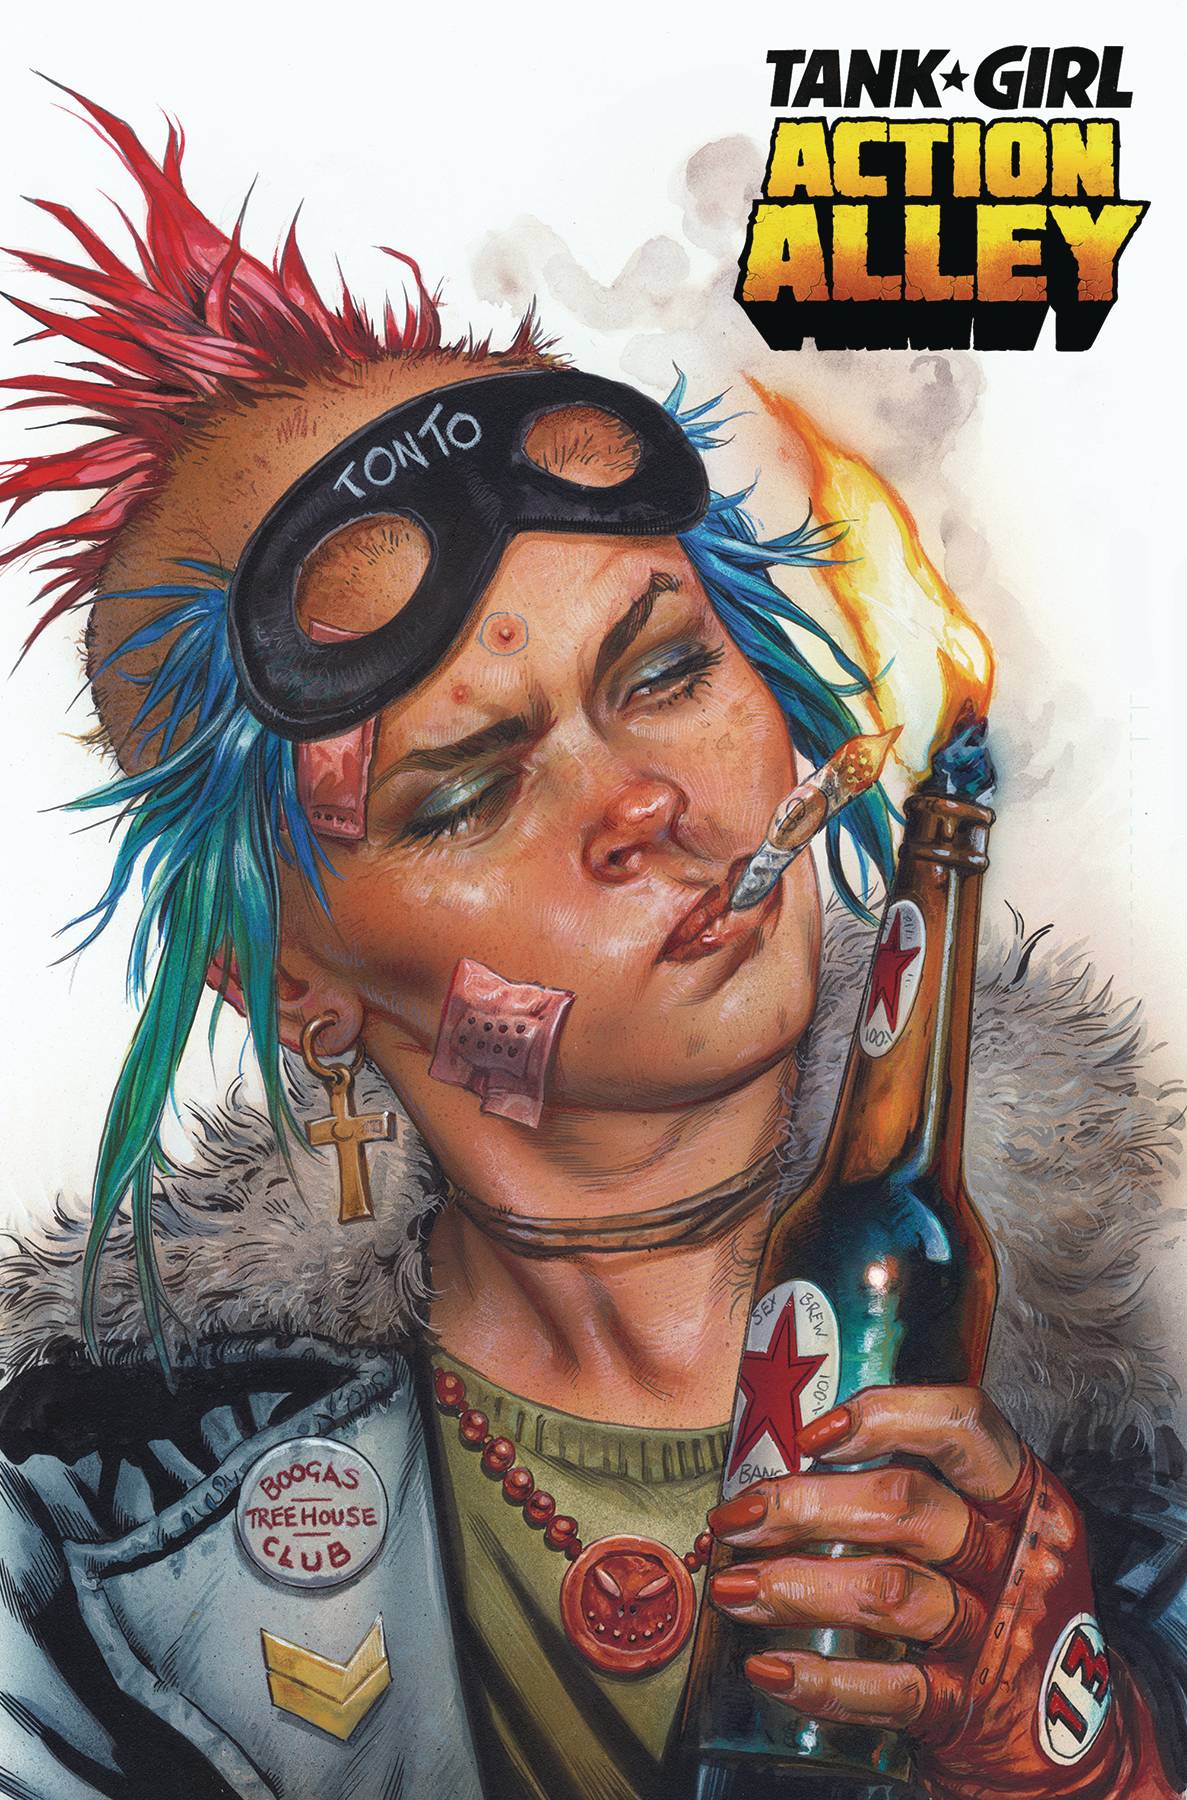 Tank Girl Action Alley #1 Cover C Staples